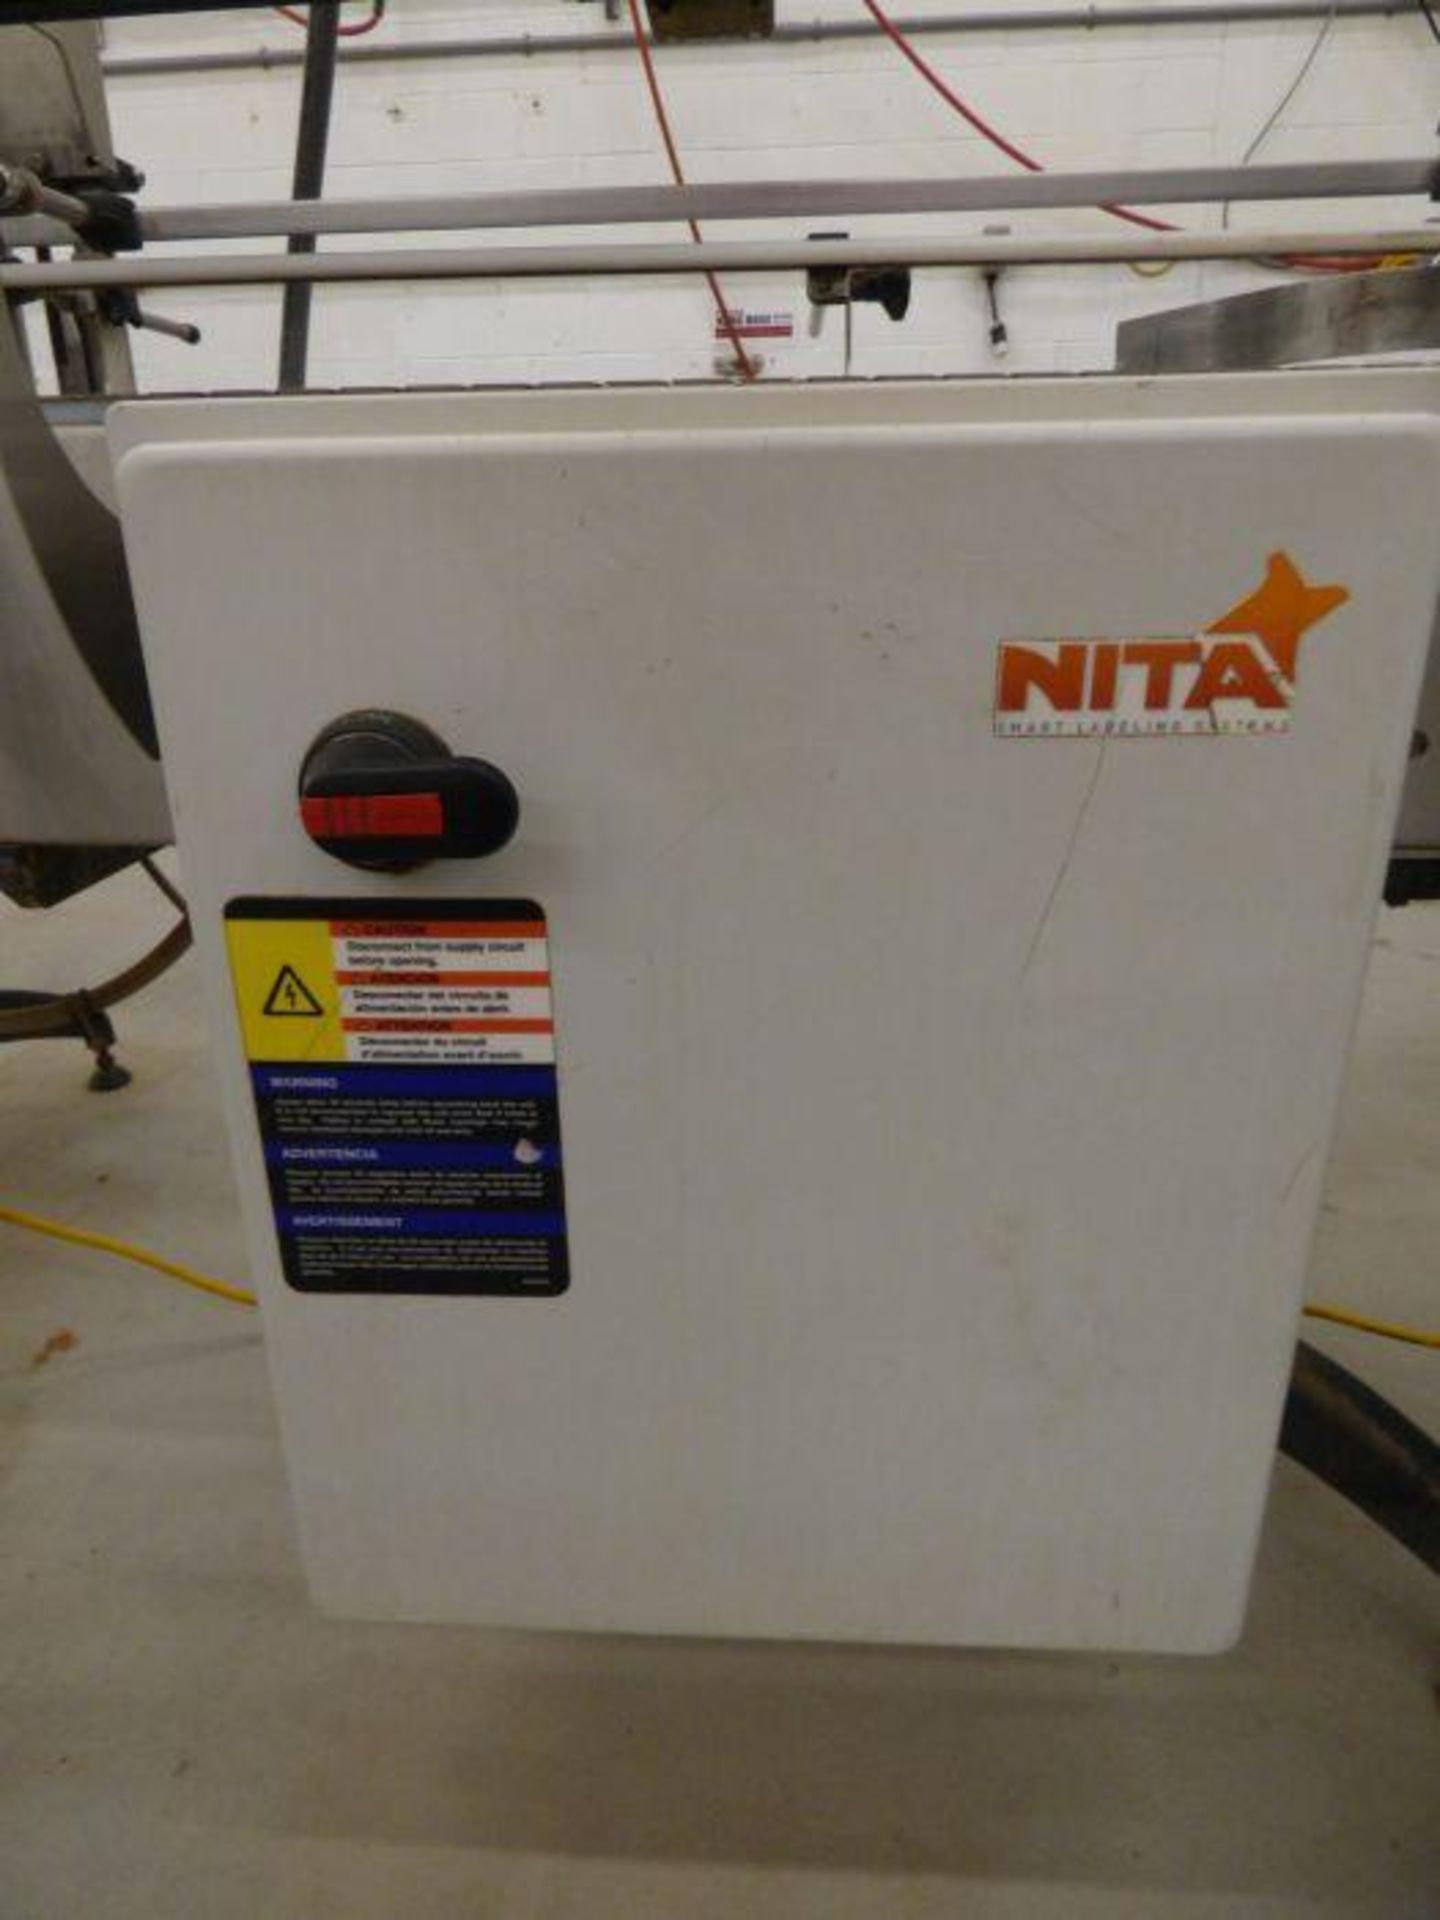 2013 Nita Synerg XP Series Horizontal Front and Back Wipe On Pressure Sensitive Labeler - Image 2 of 7